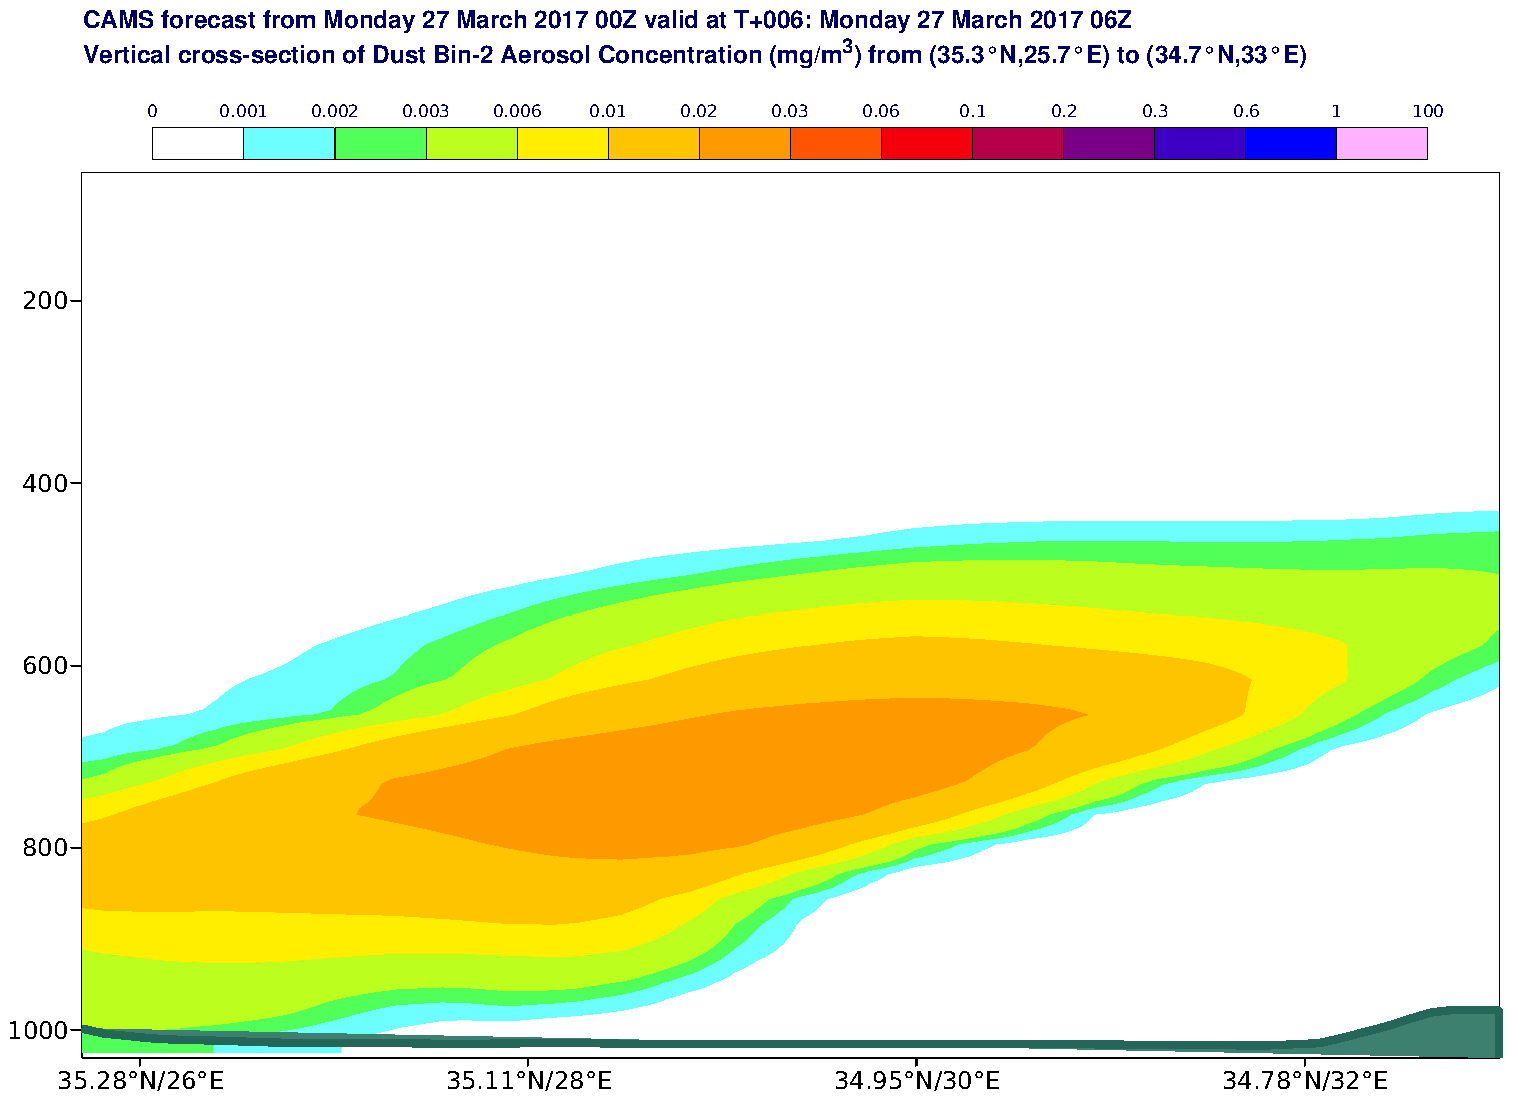 Vertical cross-section of Dust Bin-2 Aerosol Concentration (mg/m3) valid at T6 - 2017-03-27 06:00